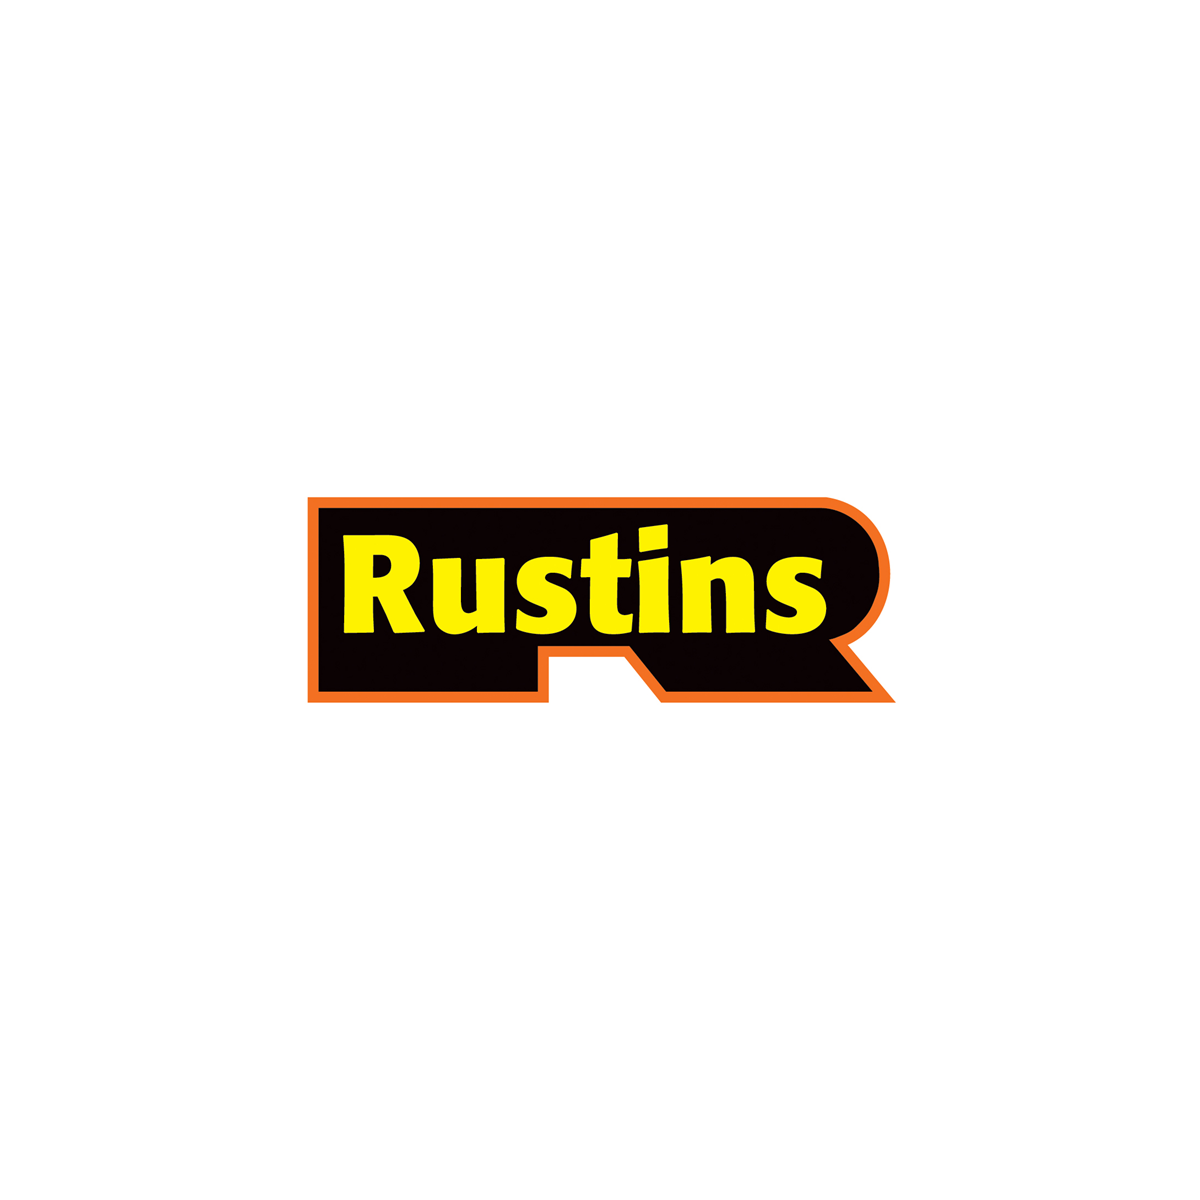 Where to buy Rustins Products